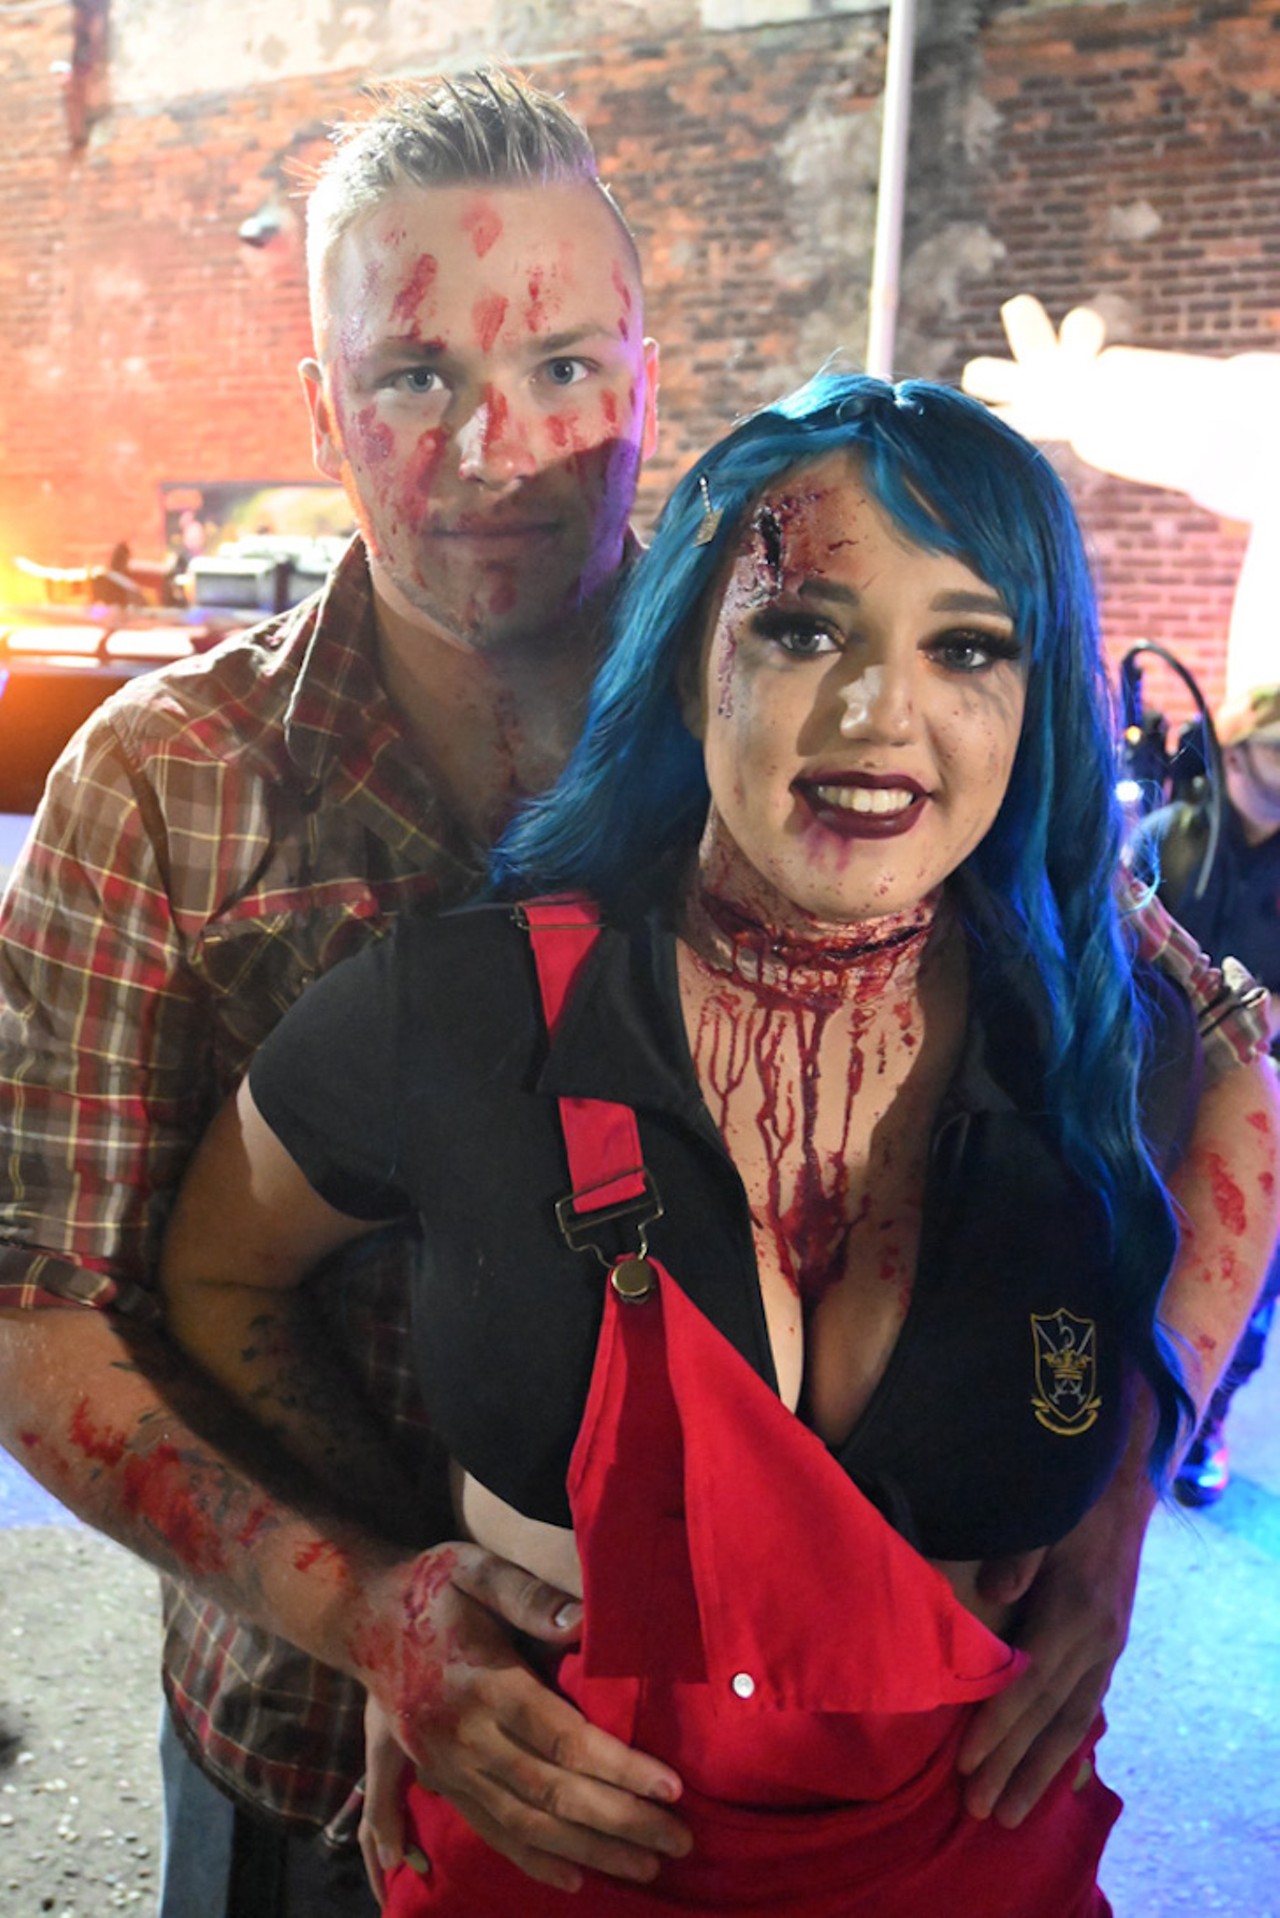 All the monsters and ghouls we saw at the 2021 Monster's Ball in Detroit